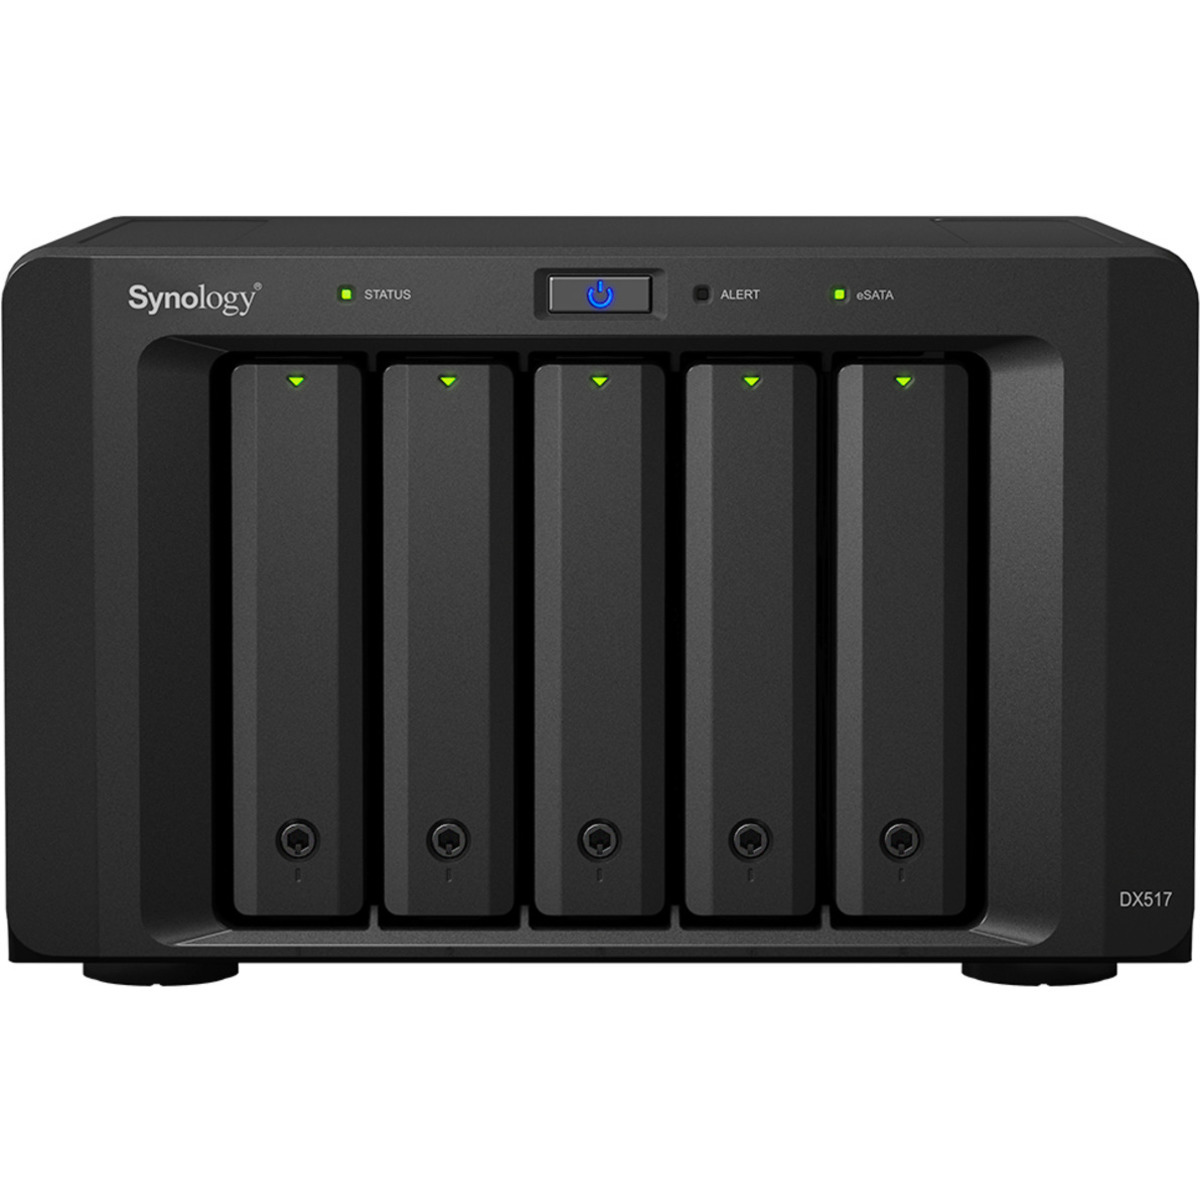 Synology DX517 External Expansion Drive 60tb 5-Bay Desktop Multimedia / Power User / Business Expansion Enclosure 3x20tb Western Digital Ultrastar HC560 WUH722020ALE6L4 3.5 7200rpm SATA 6Gb/s HDD ENTERPRISE Class Drives Installed - Burn-In Tested DX517 External Expansion Drive